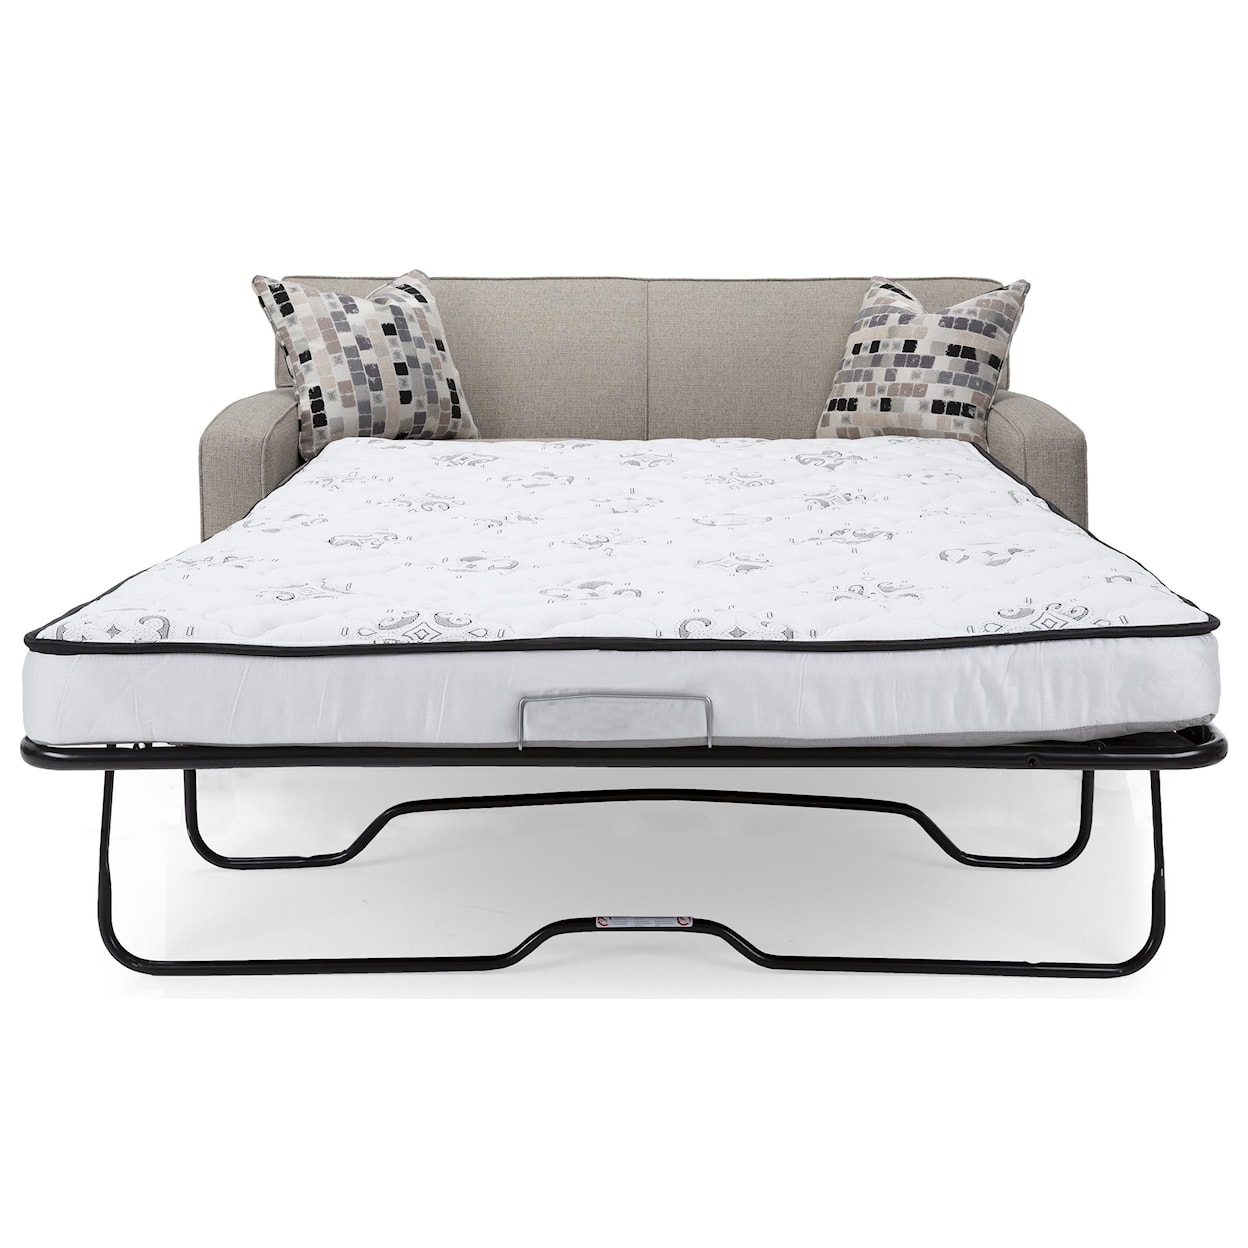 Taelor Designs Nita Double Sofabed